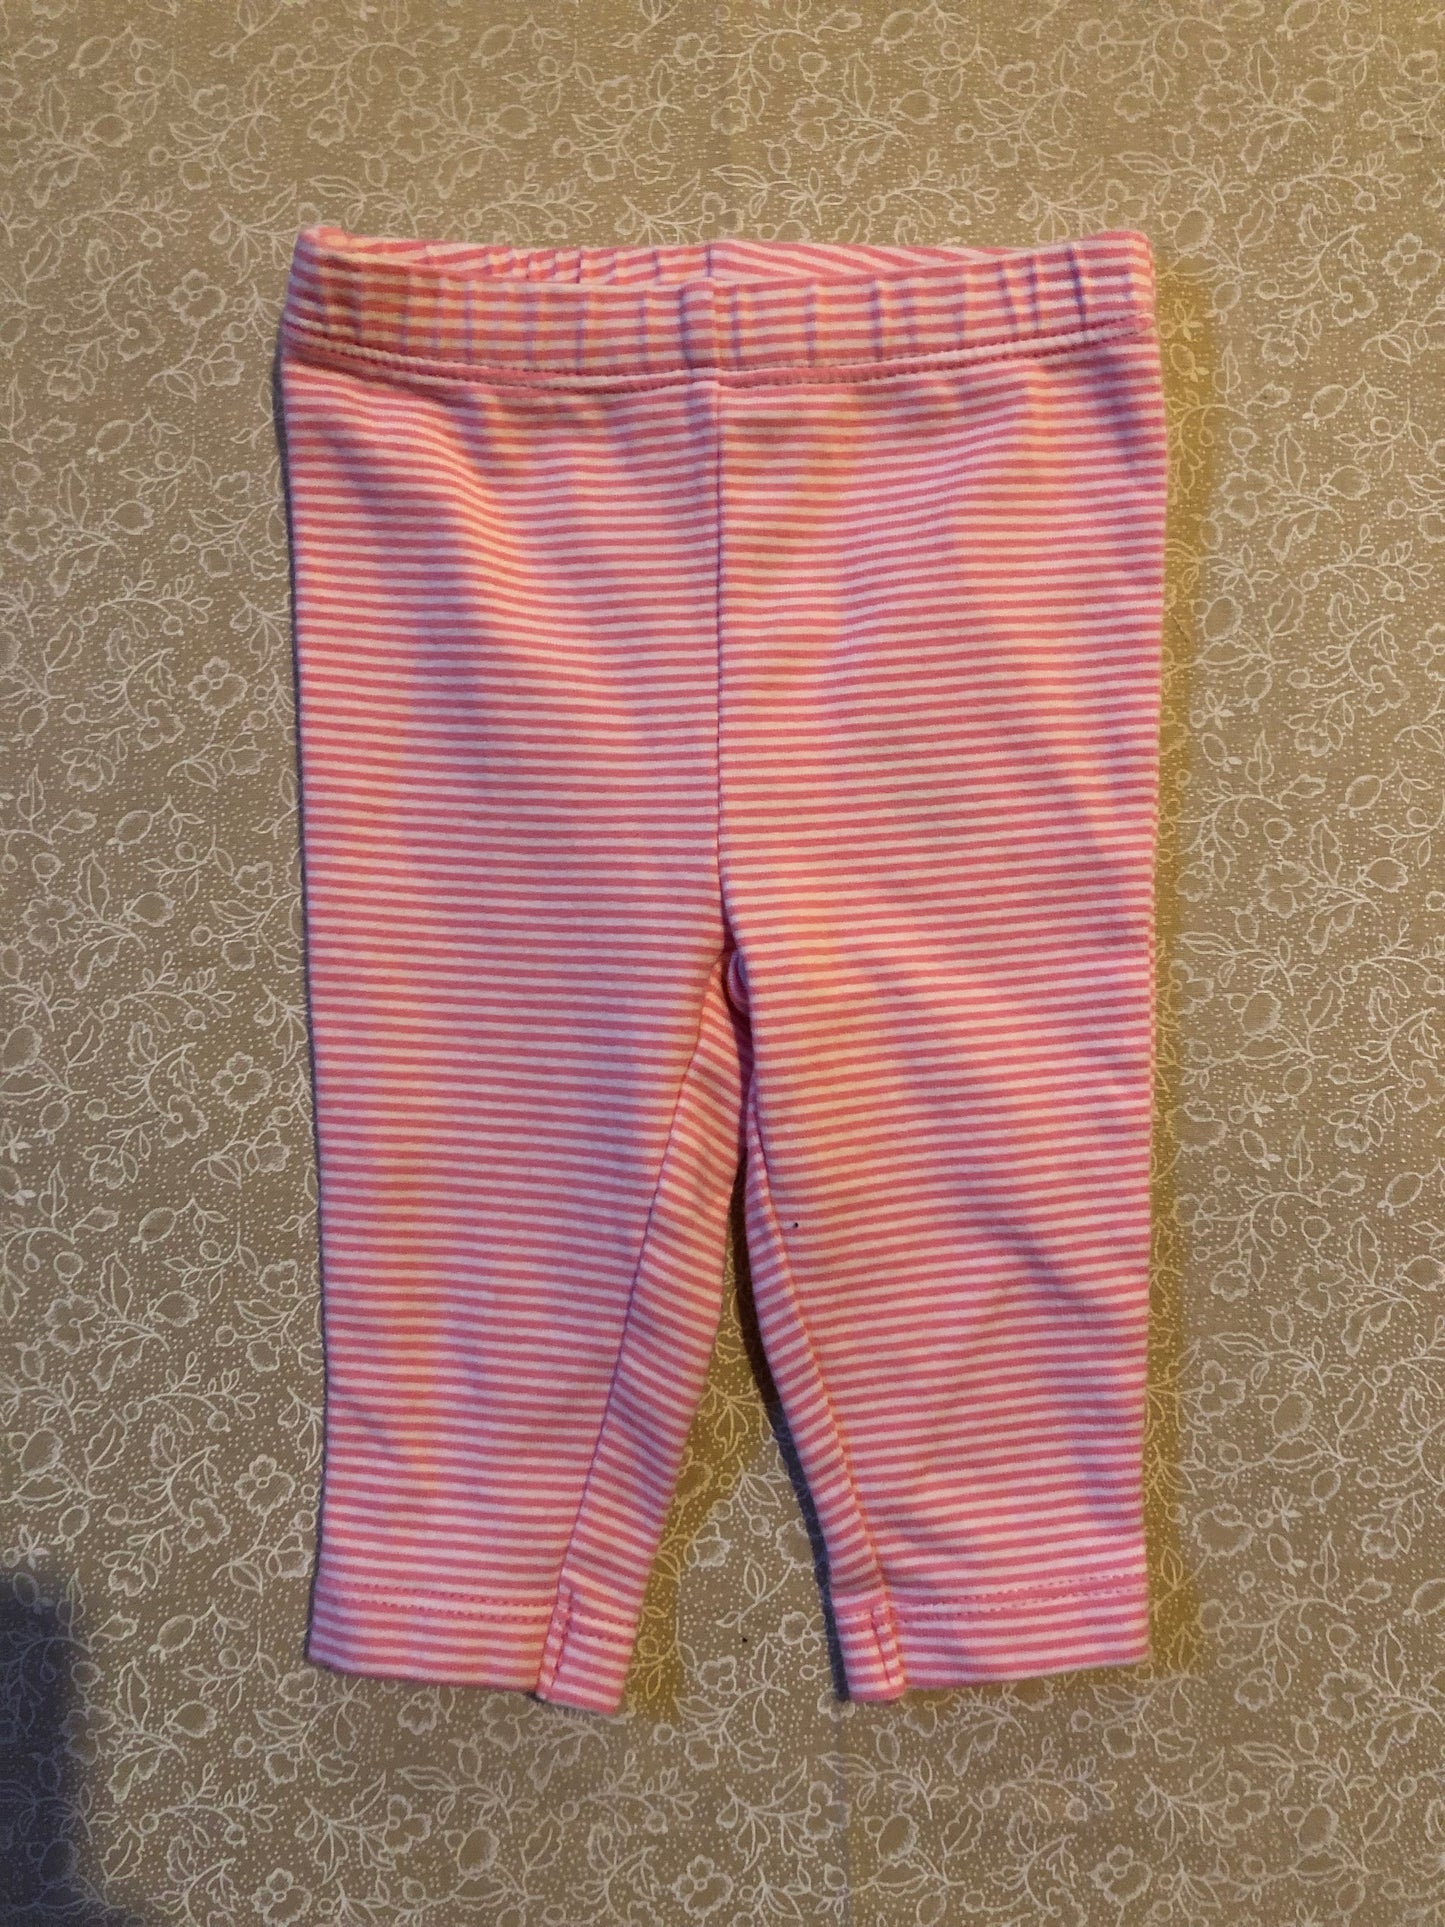 3-month-pants-carters-pink-white-stripes